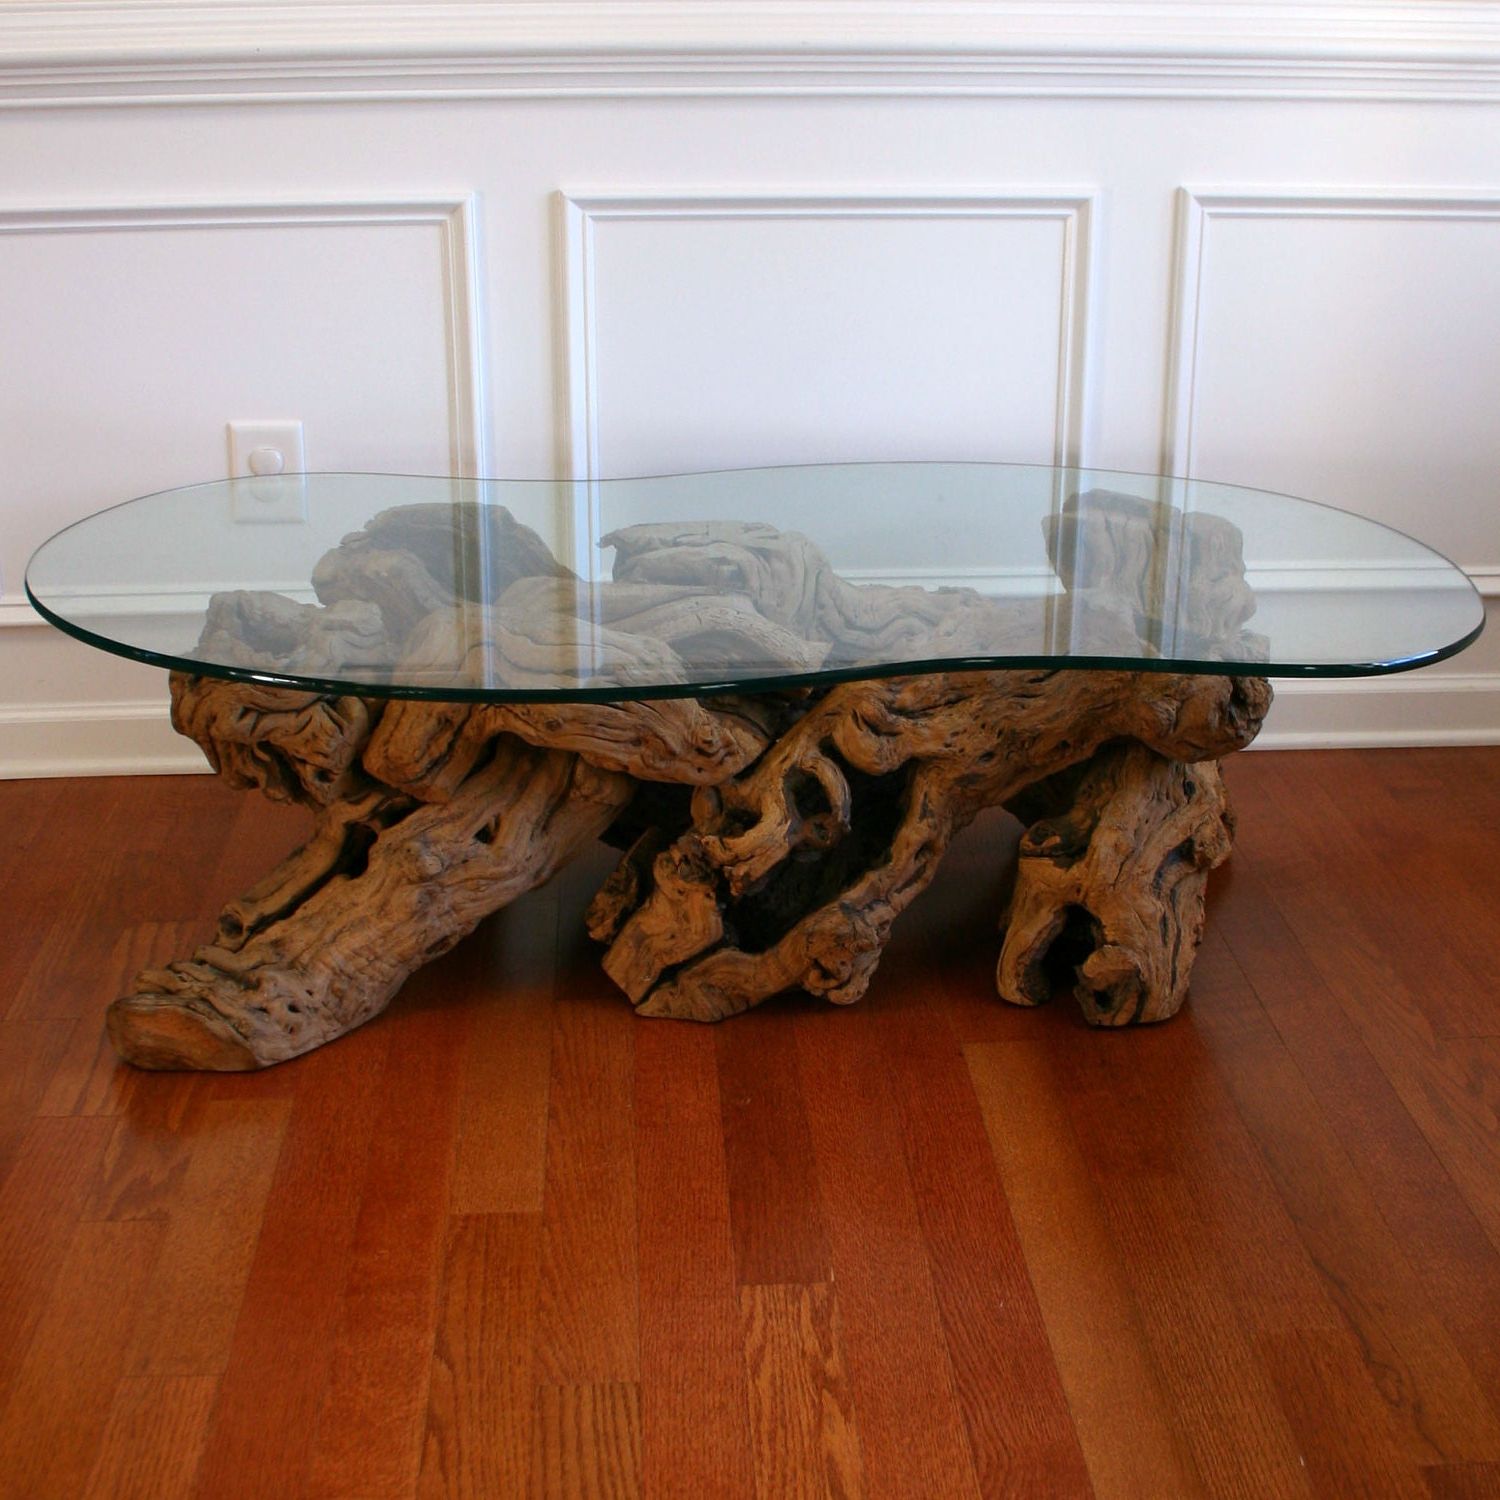 Widely Used Driftwood Coffee Table With Glass Top. Cocktail. Beach. Zen (View 16 of 20)